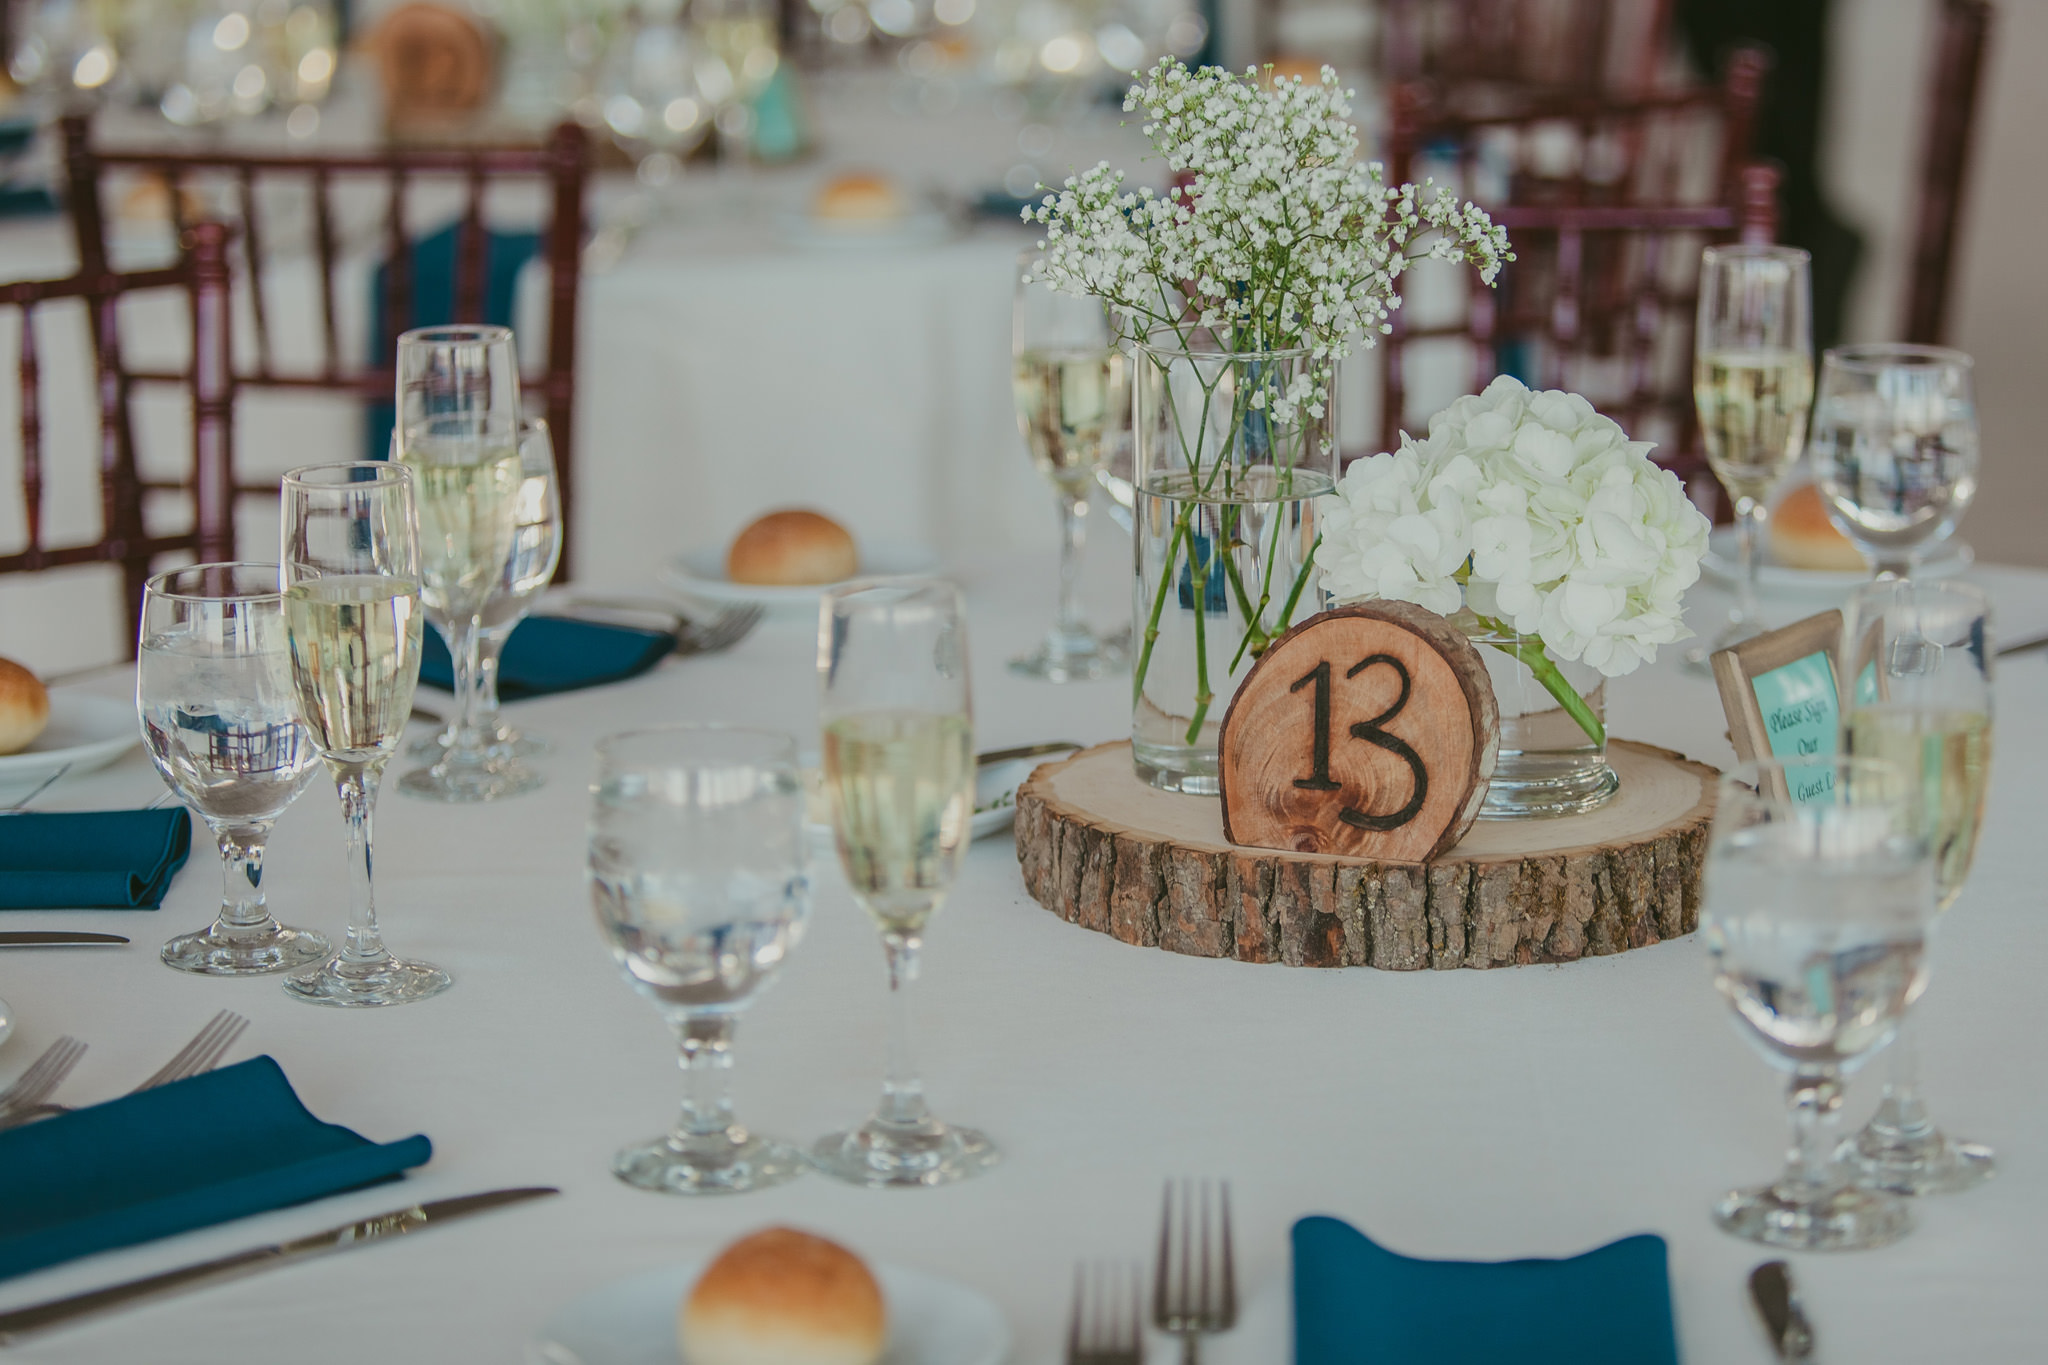 A simple woodland themed reception at Glen Foerd on the Delaware